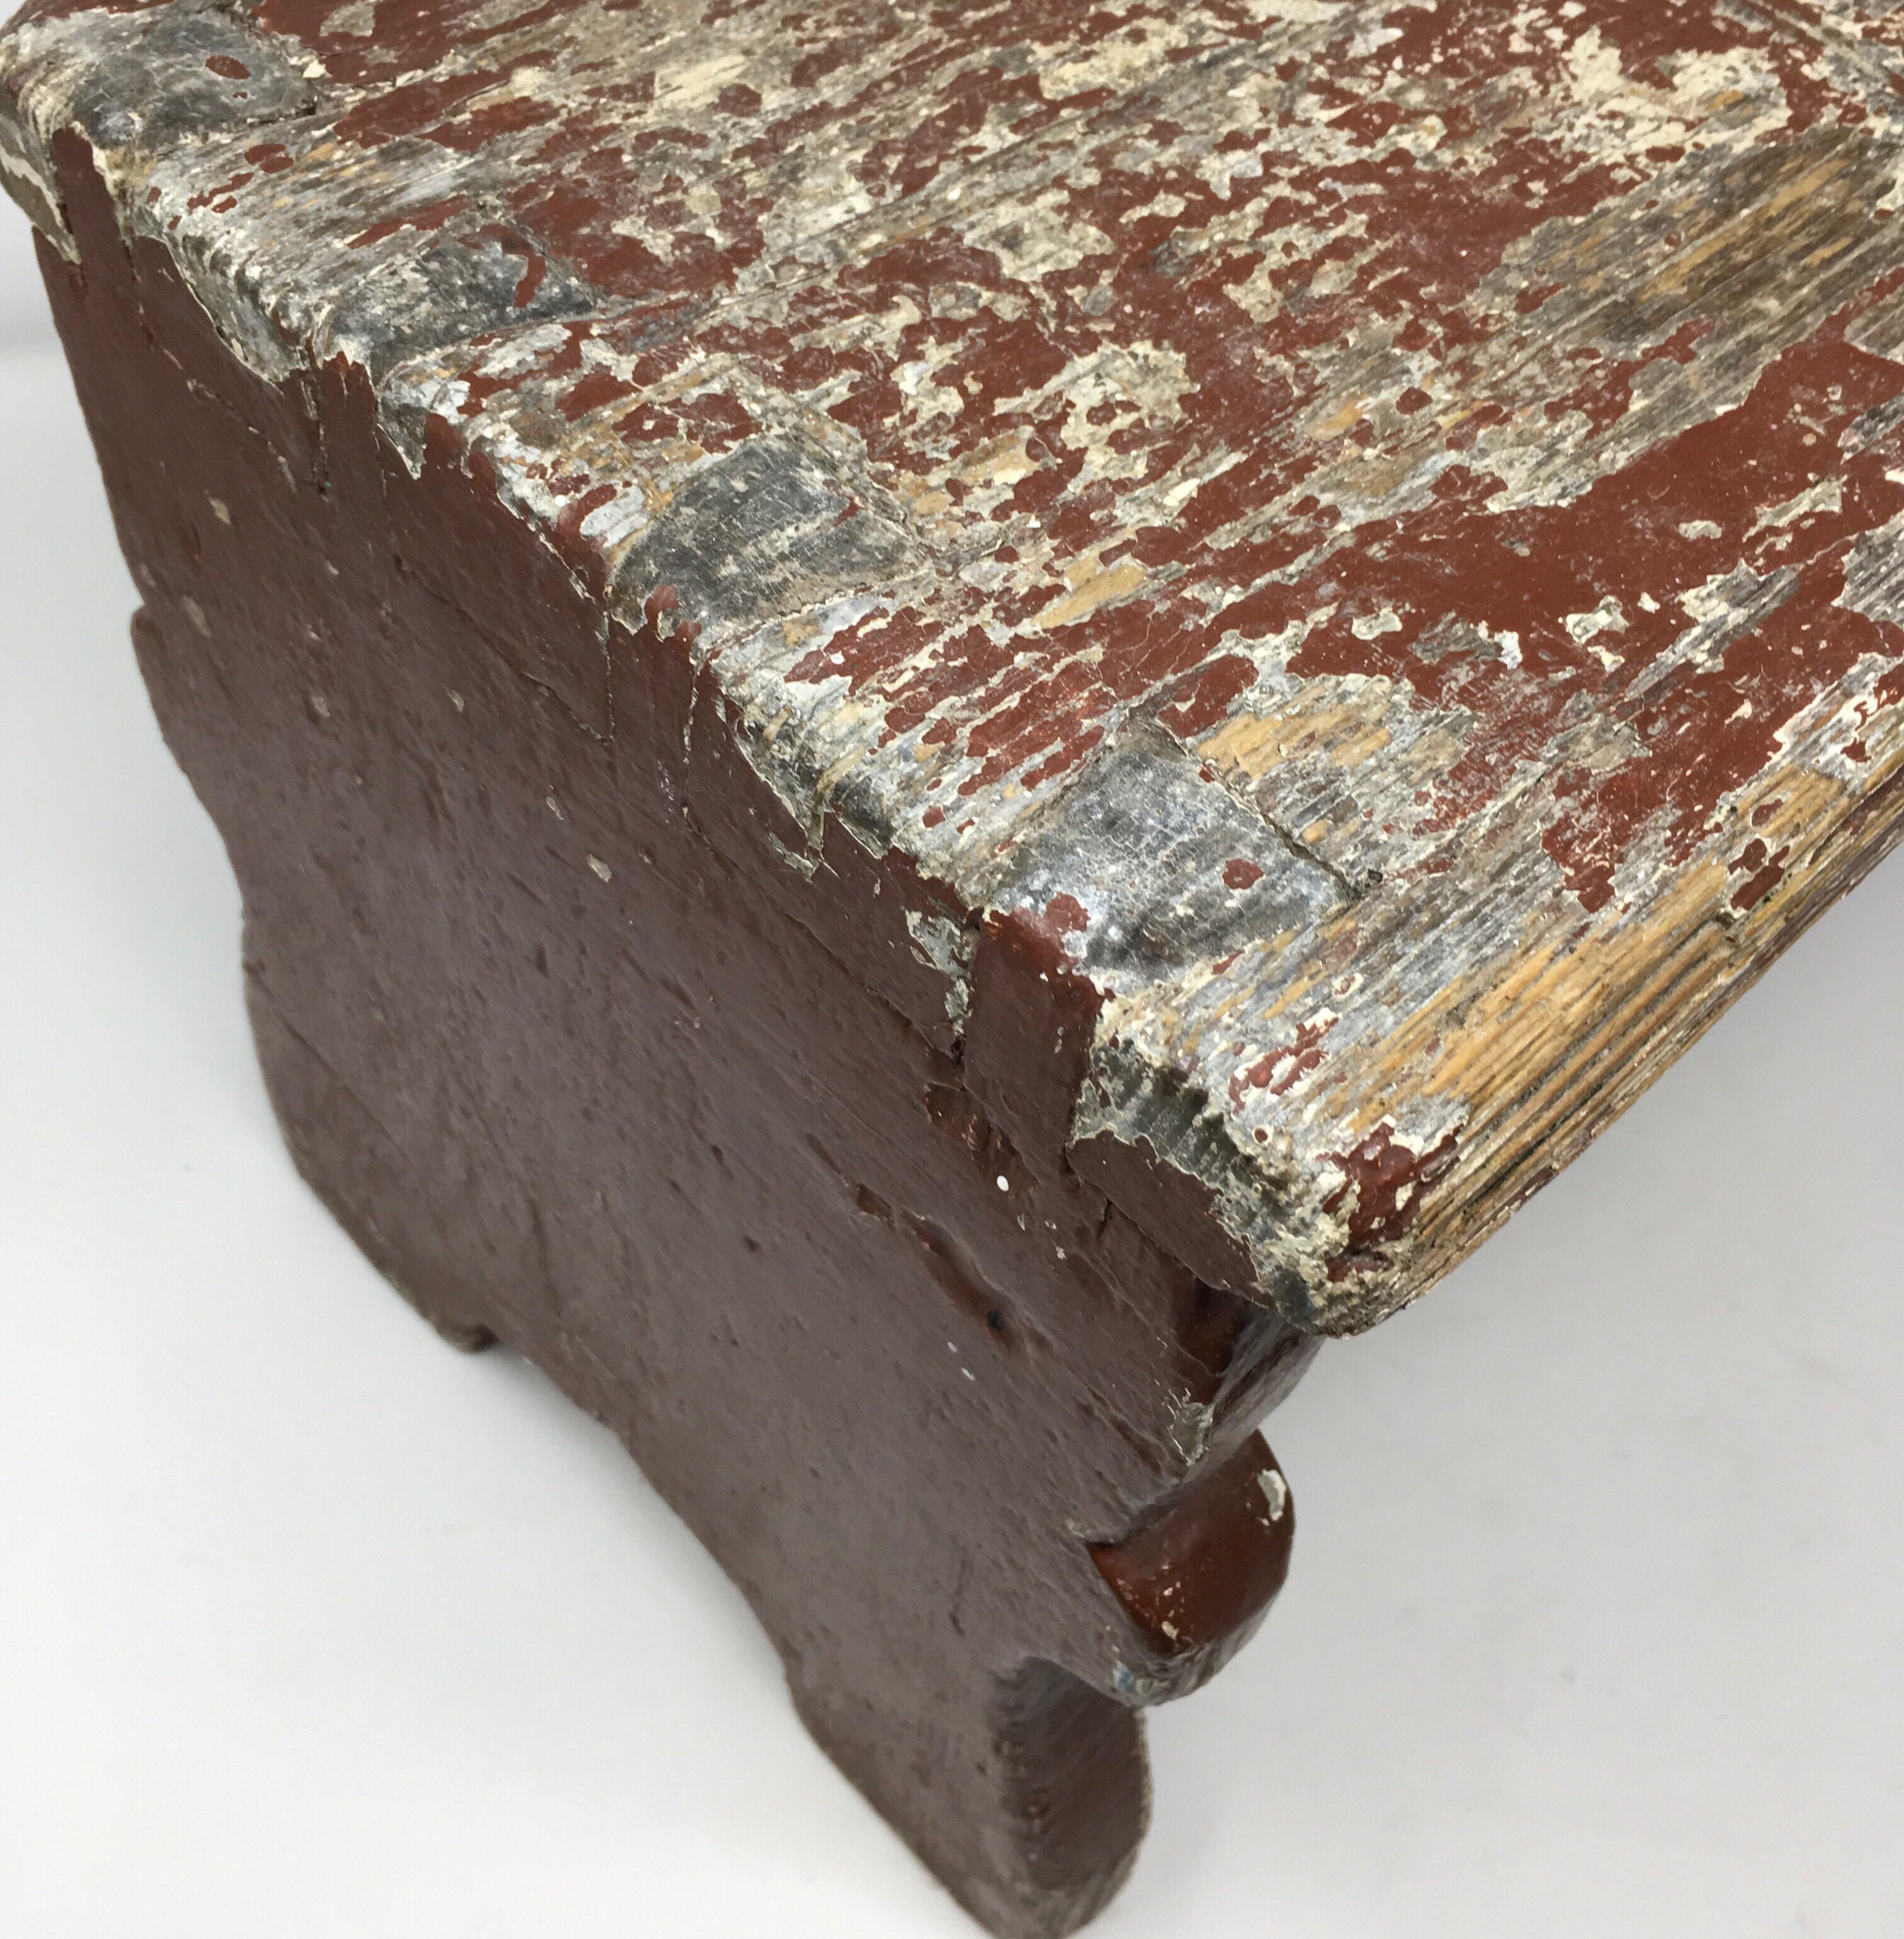 Found in the South of France, this antique French milking stool with aged patina and traces of original paint is made of solid hardwood with dovetail construction and bears a hand cut opening in the top for ease of carry. With its rustic charm,